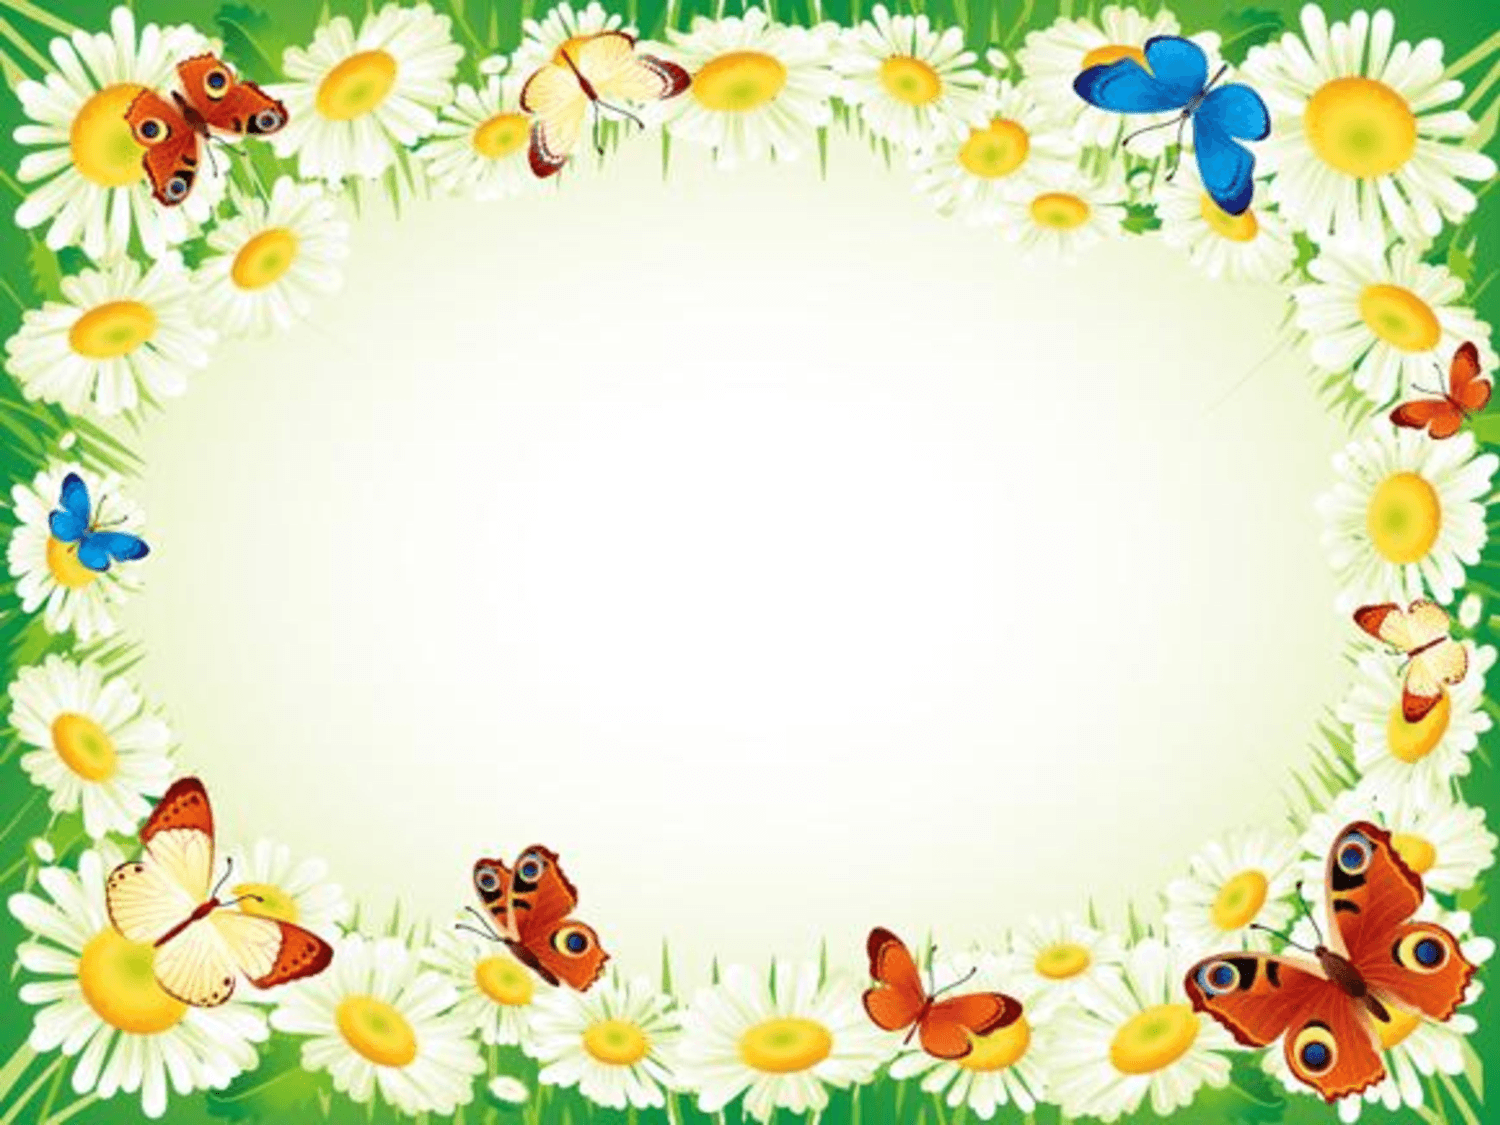 Nature Border Wallpaper and Background. special events. Border